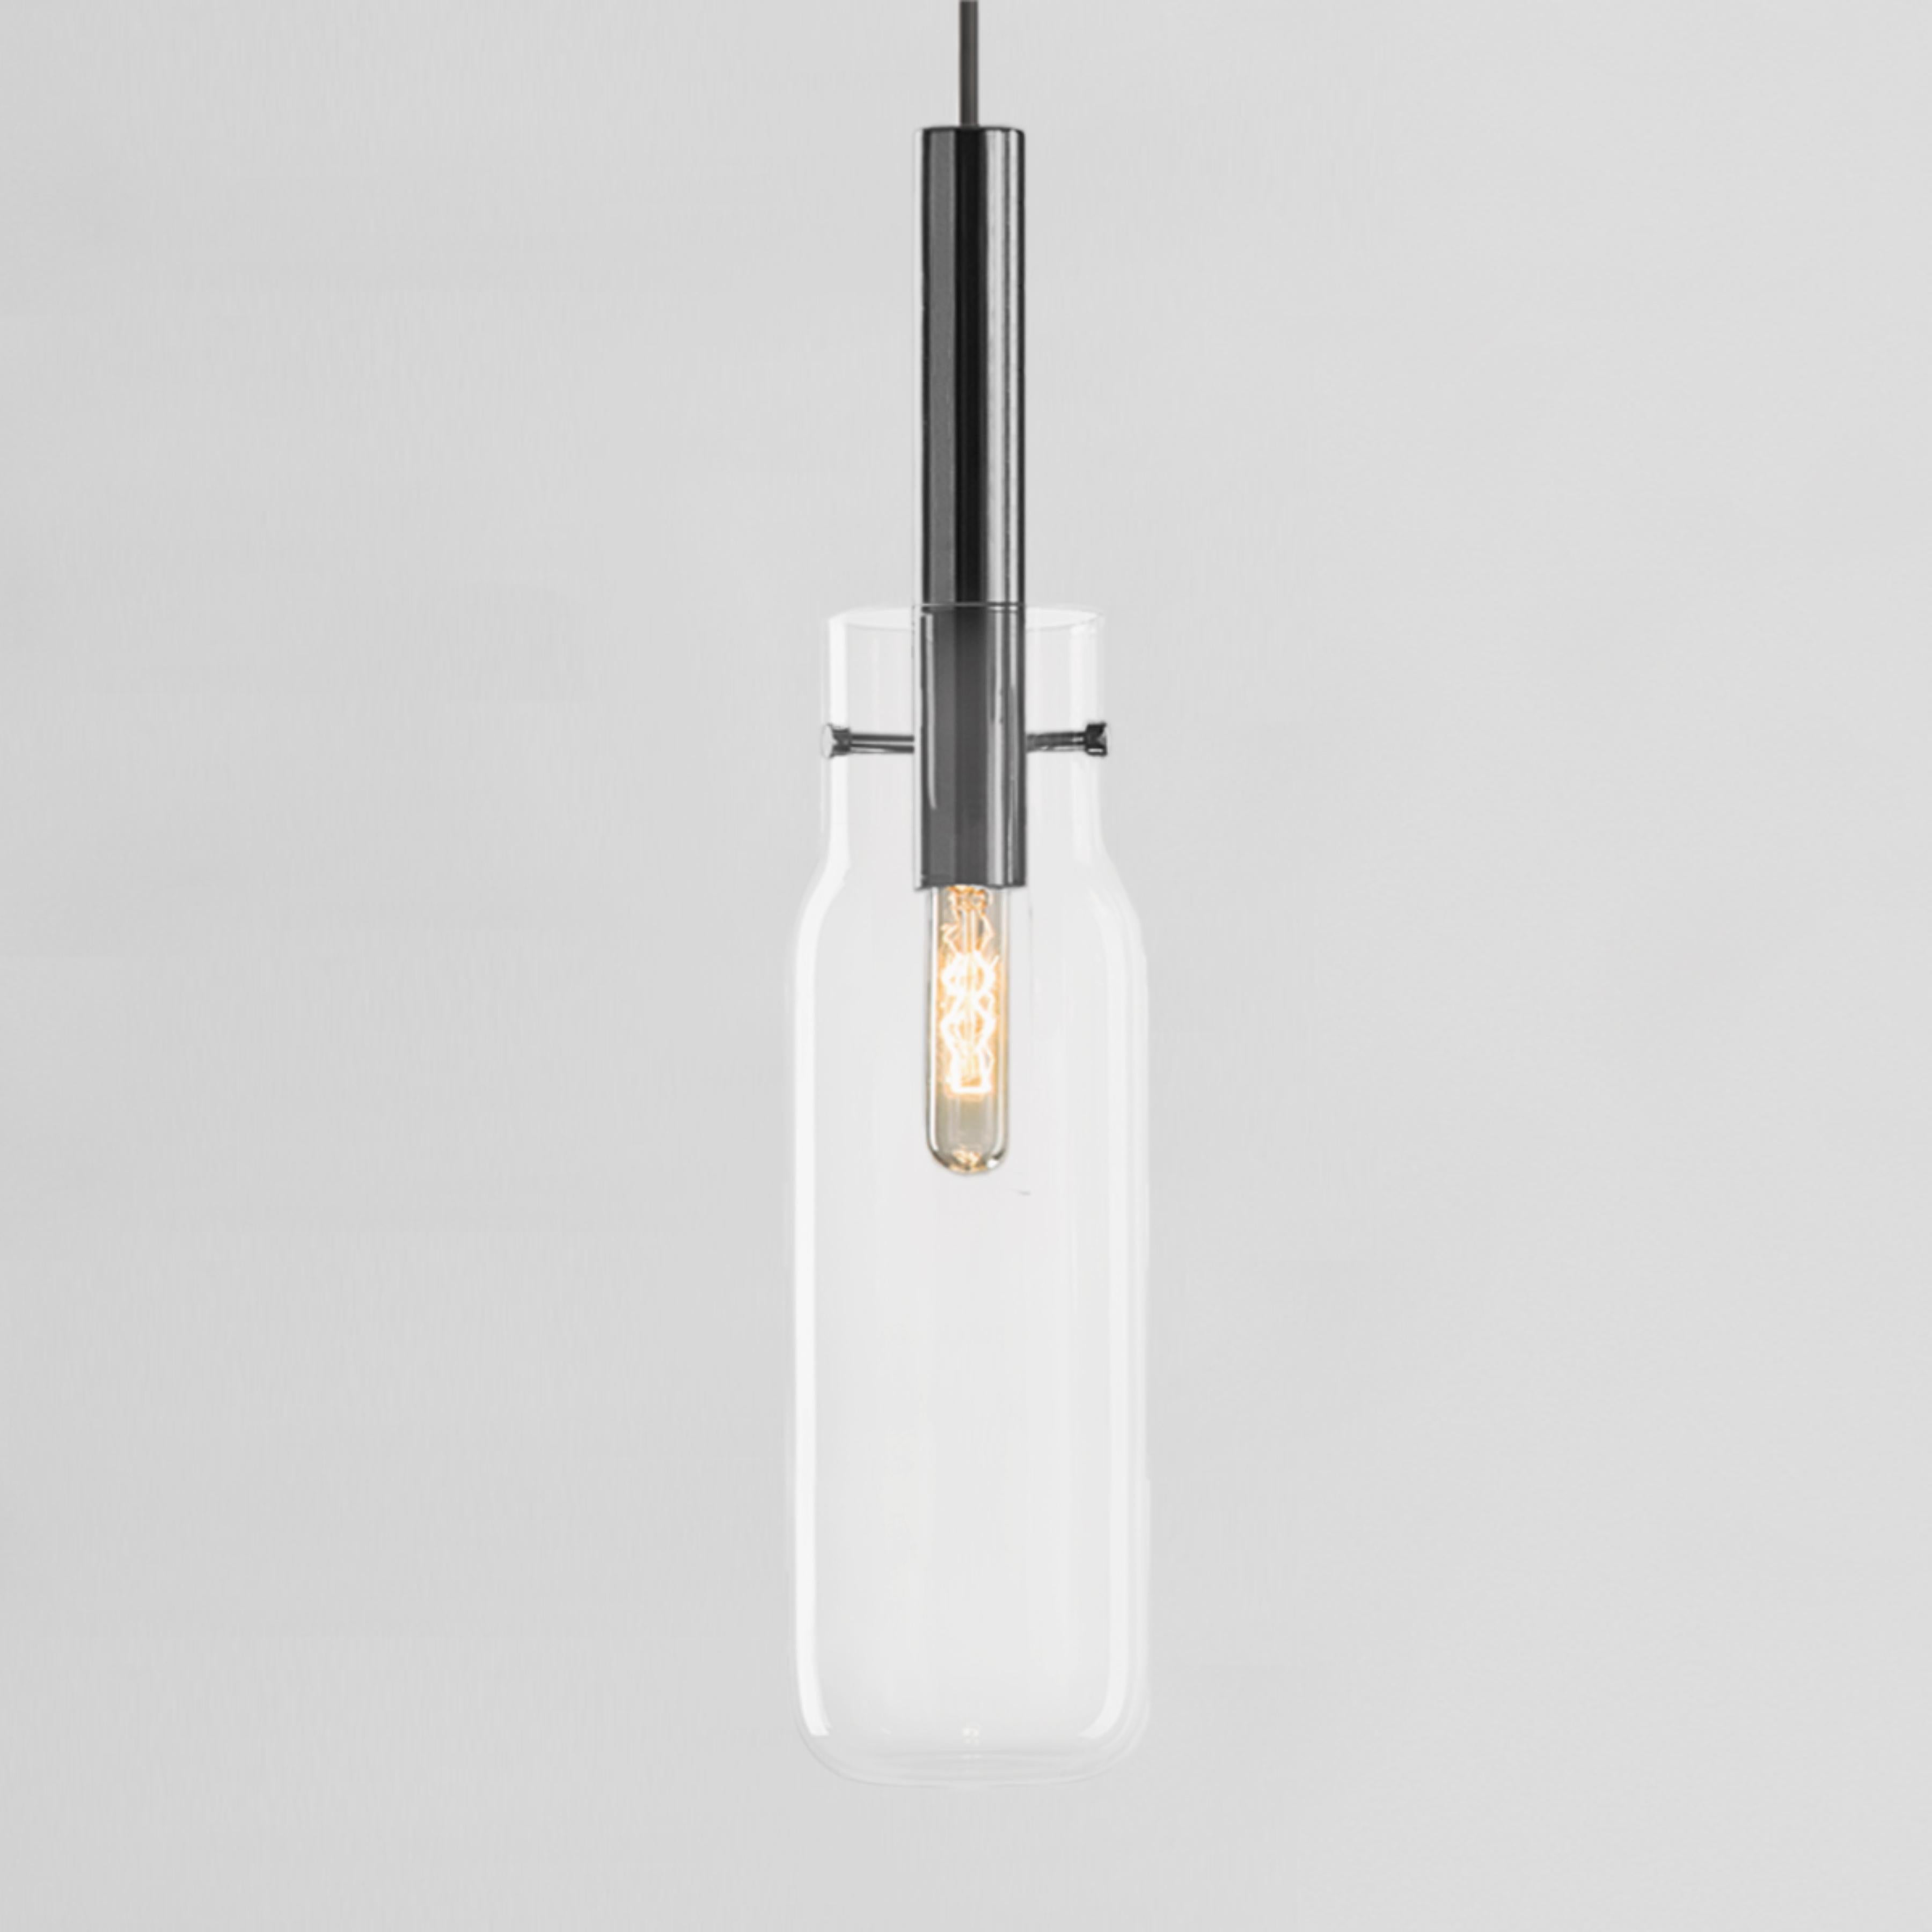 Tall Bandaska pendant light by Dechem Studio
Dimensions: D 9 x H 180 cm
Materials: Brass, glass.
Also available: Different colours and sizes available.

hand blown into beechwood moulds, Bandaska Lights is based on the highly popular Bandaska